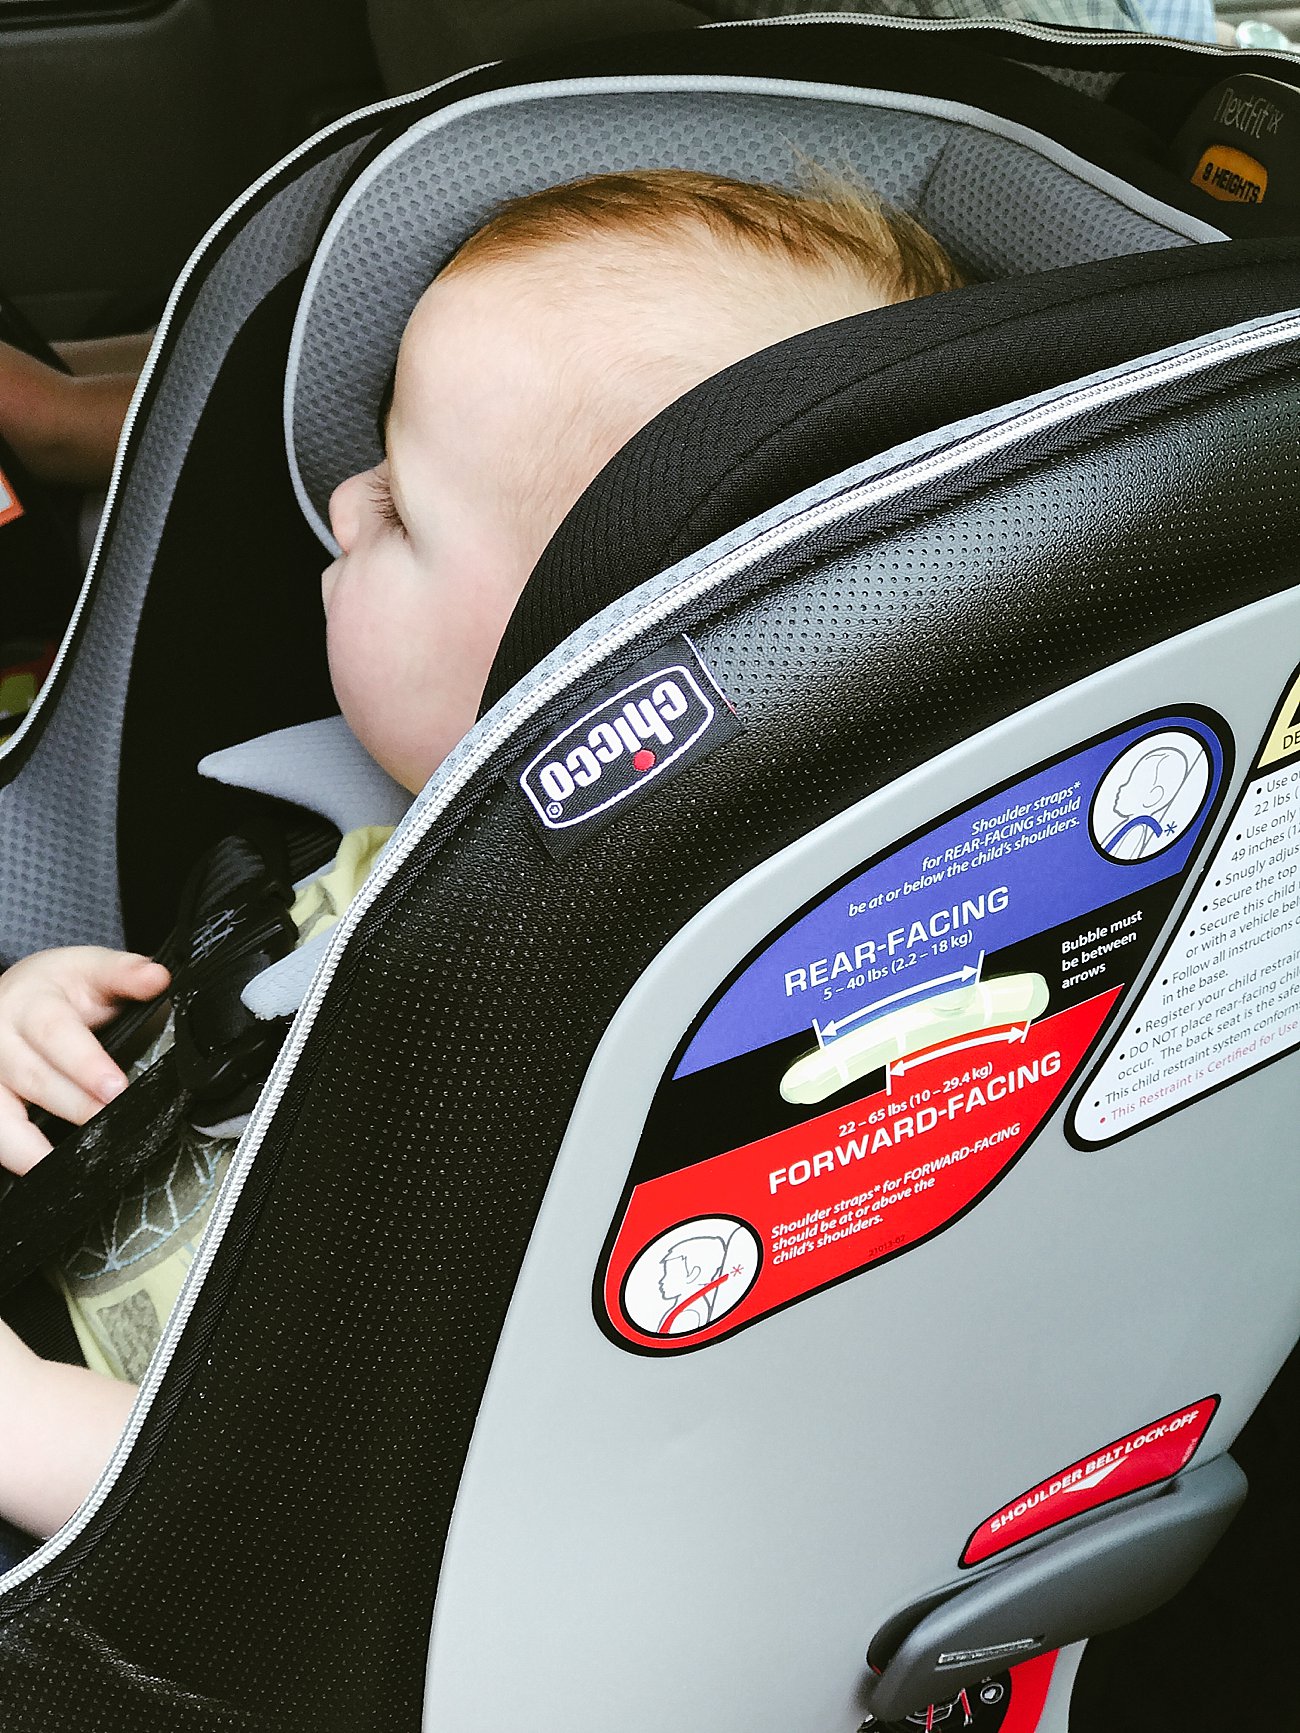 Chicco NextFit® iX - TurnAfter2 Campaign - Best rear facing convertible car seat that can fit in a pickup truck (4) - Why I Am Passionate About Extended Rear Facing (& Chicco Fit2 Giveaway!) by North Carolina mom blogger Still Being Molly